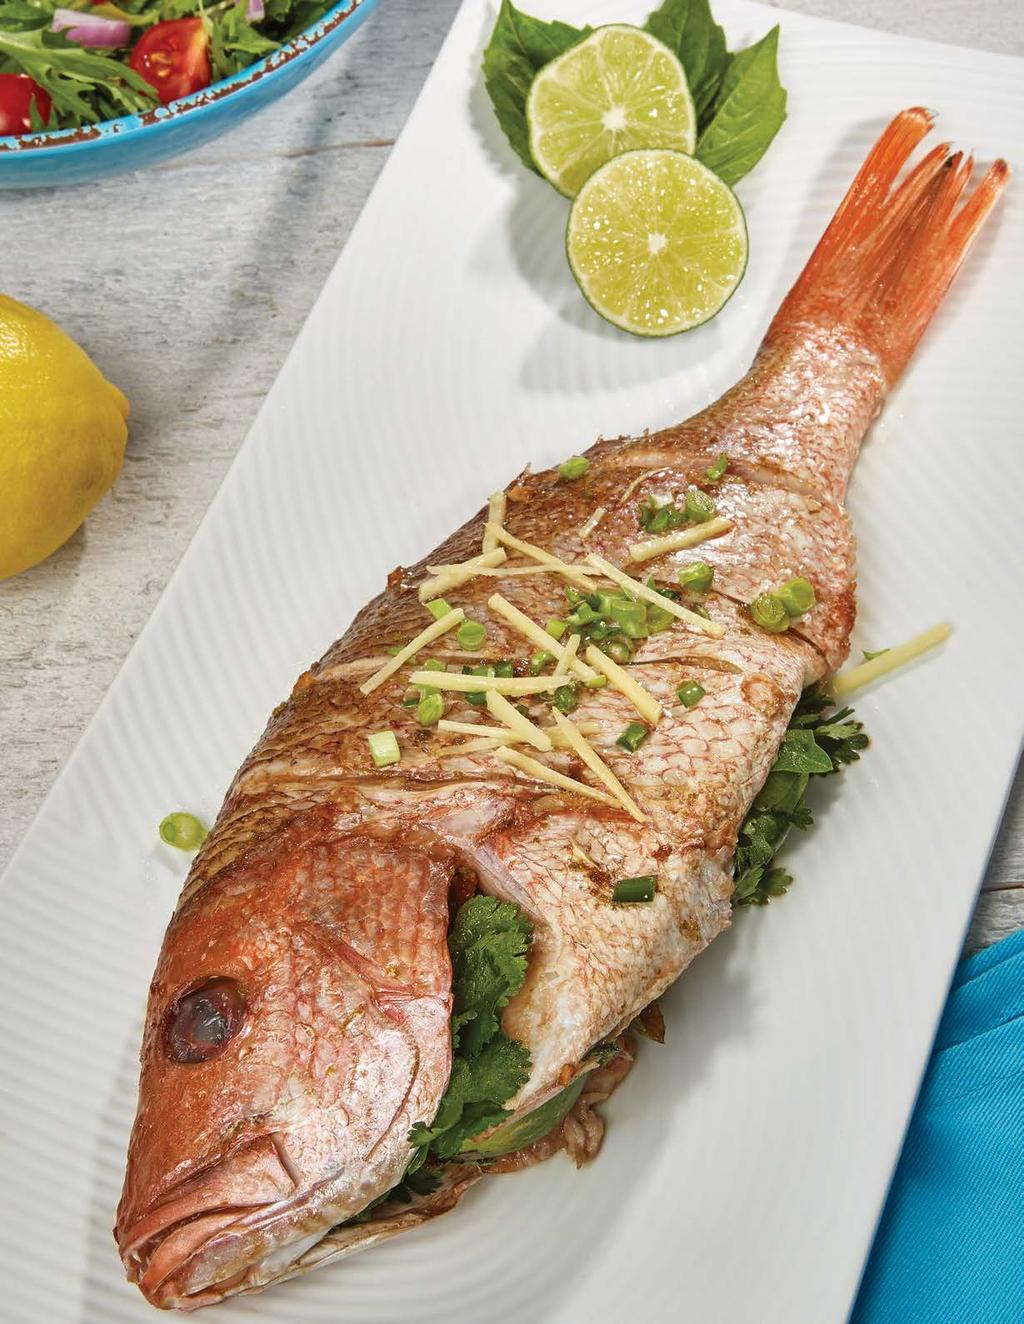 SERVES 4-6 Whole Thai Steamed Snapper 1 (2-3 lb.) snapper, cleaned with head & tail on 2 tbsp. toasted sesame oil 2 cloves garlic, smashed 1 Thai chili, sliced 2 tbsp.